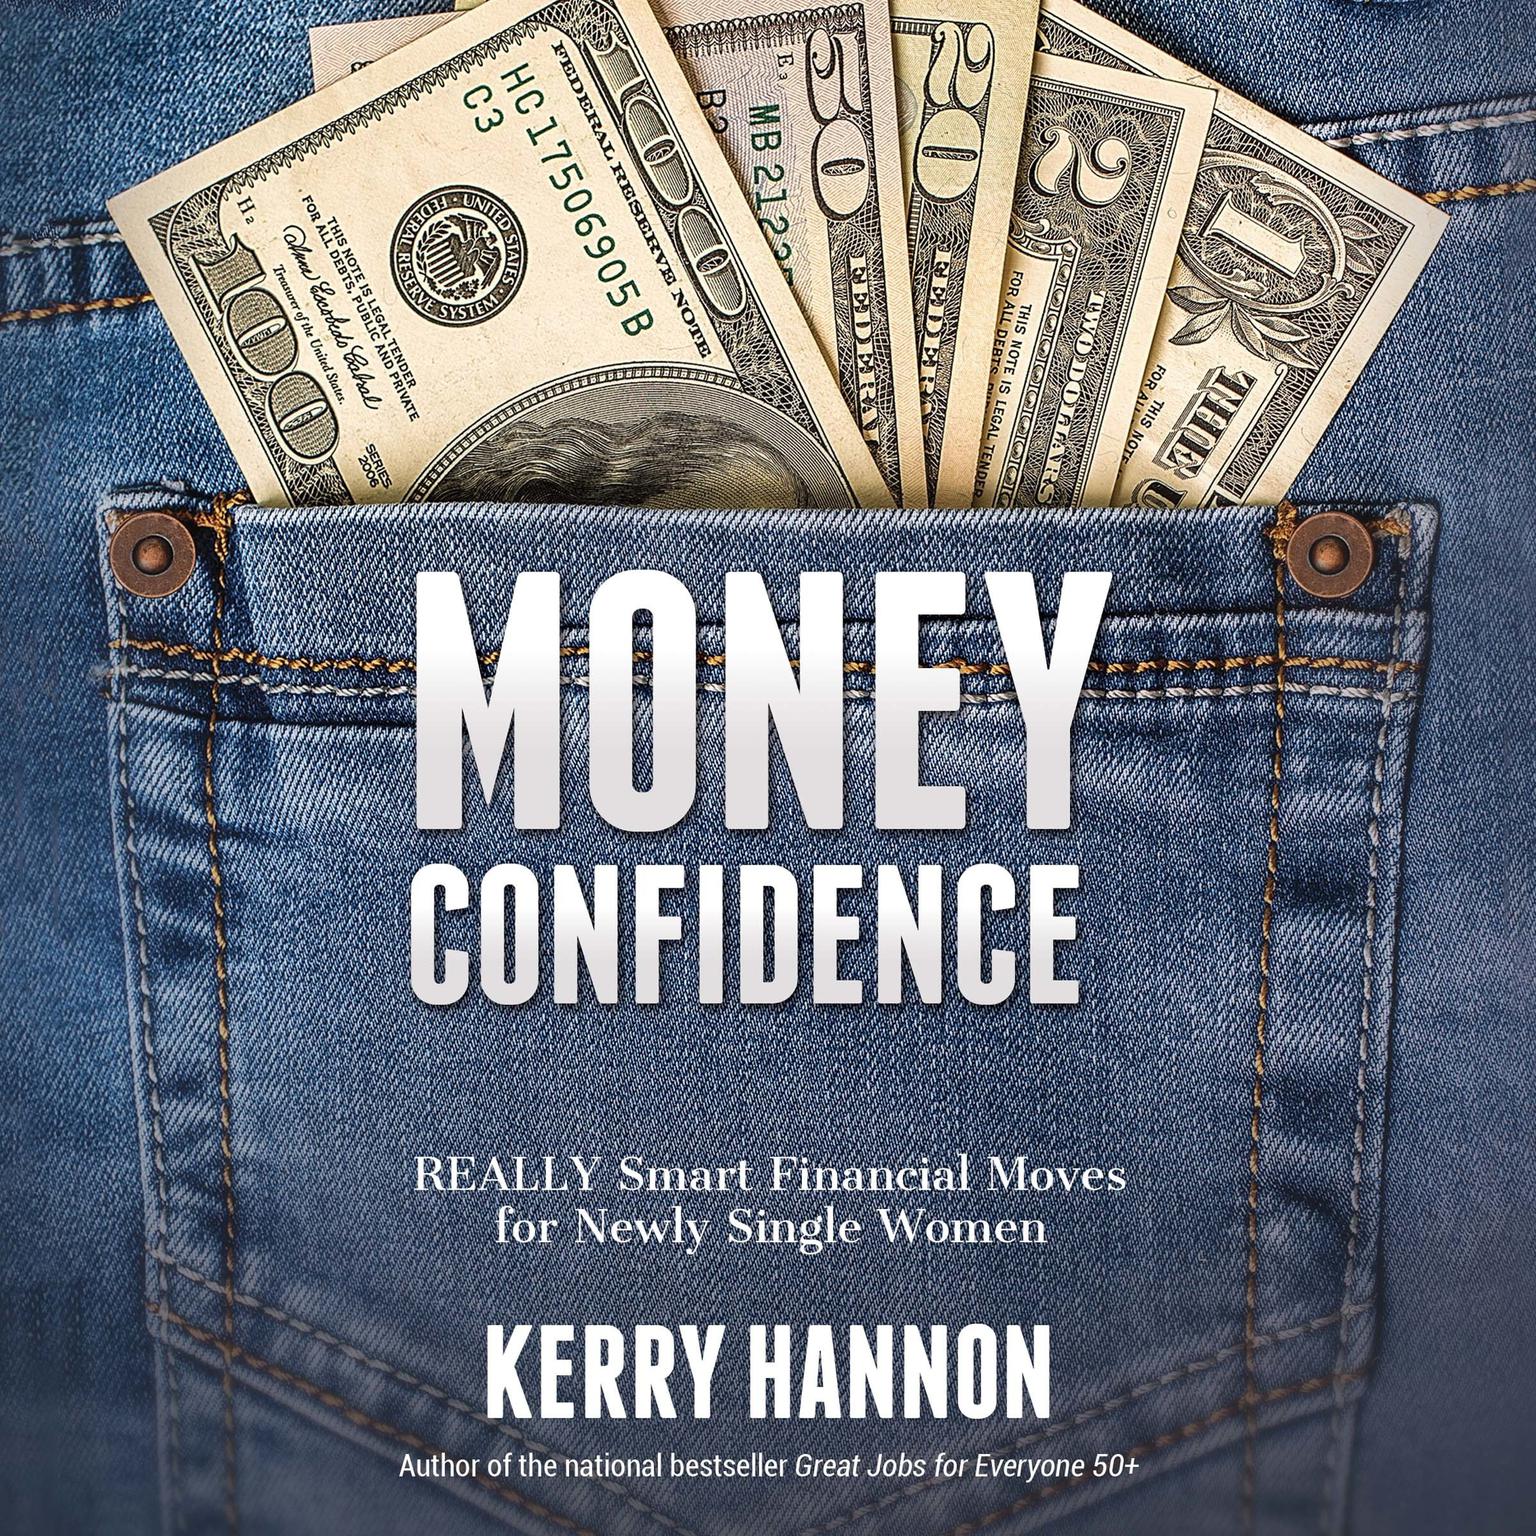 Money Confidence: Really Smart Financial Moves for Newly Single Women Audiobook, by Kerry Hannon